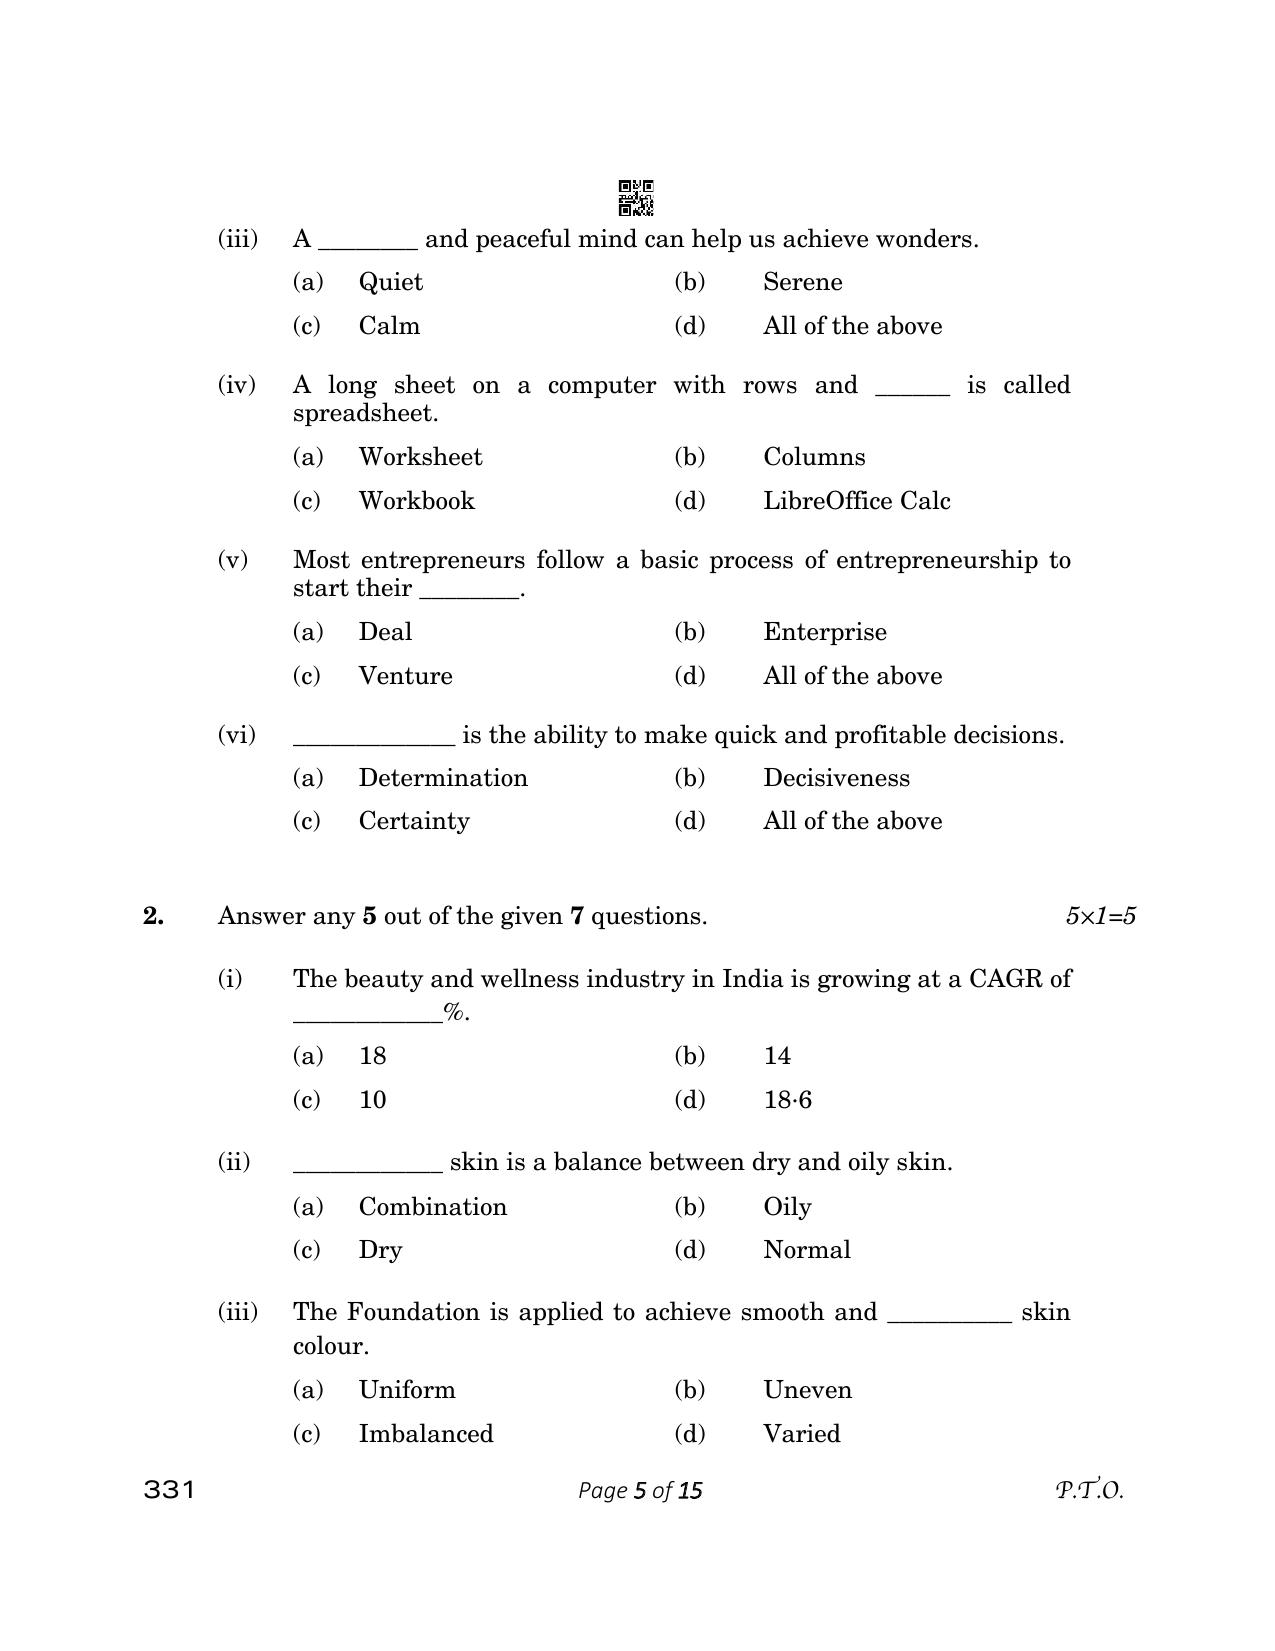 CBSE Class 12 331 Beauty And Wellness 2023 Question Paper - Page 5